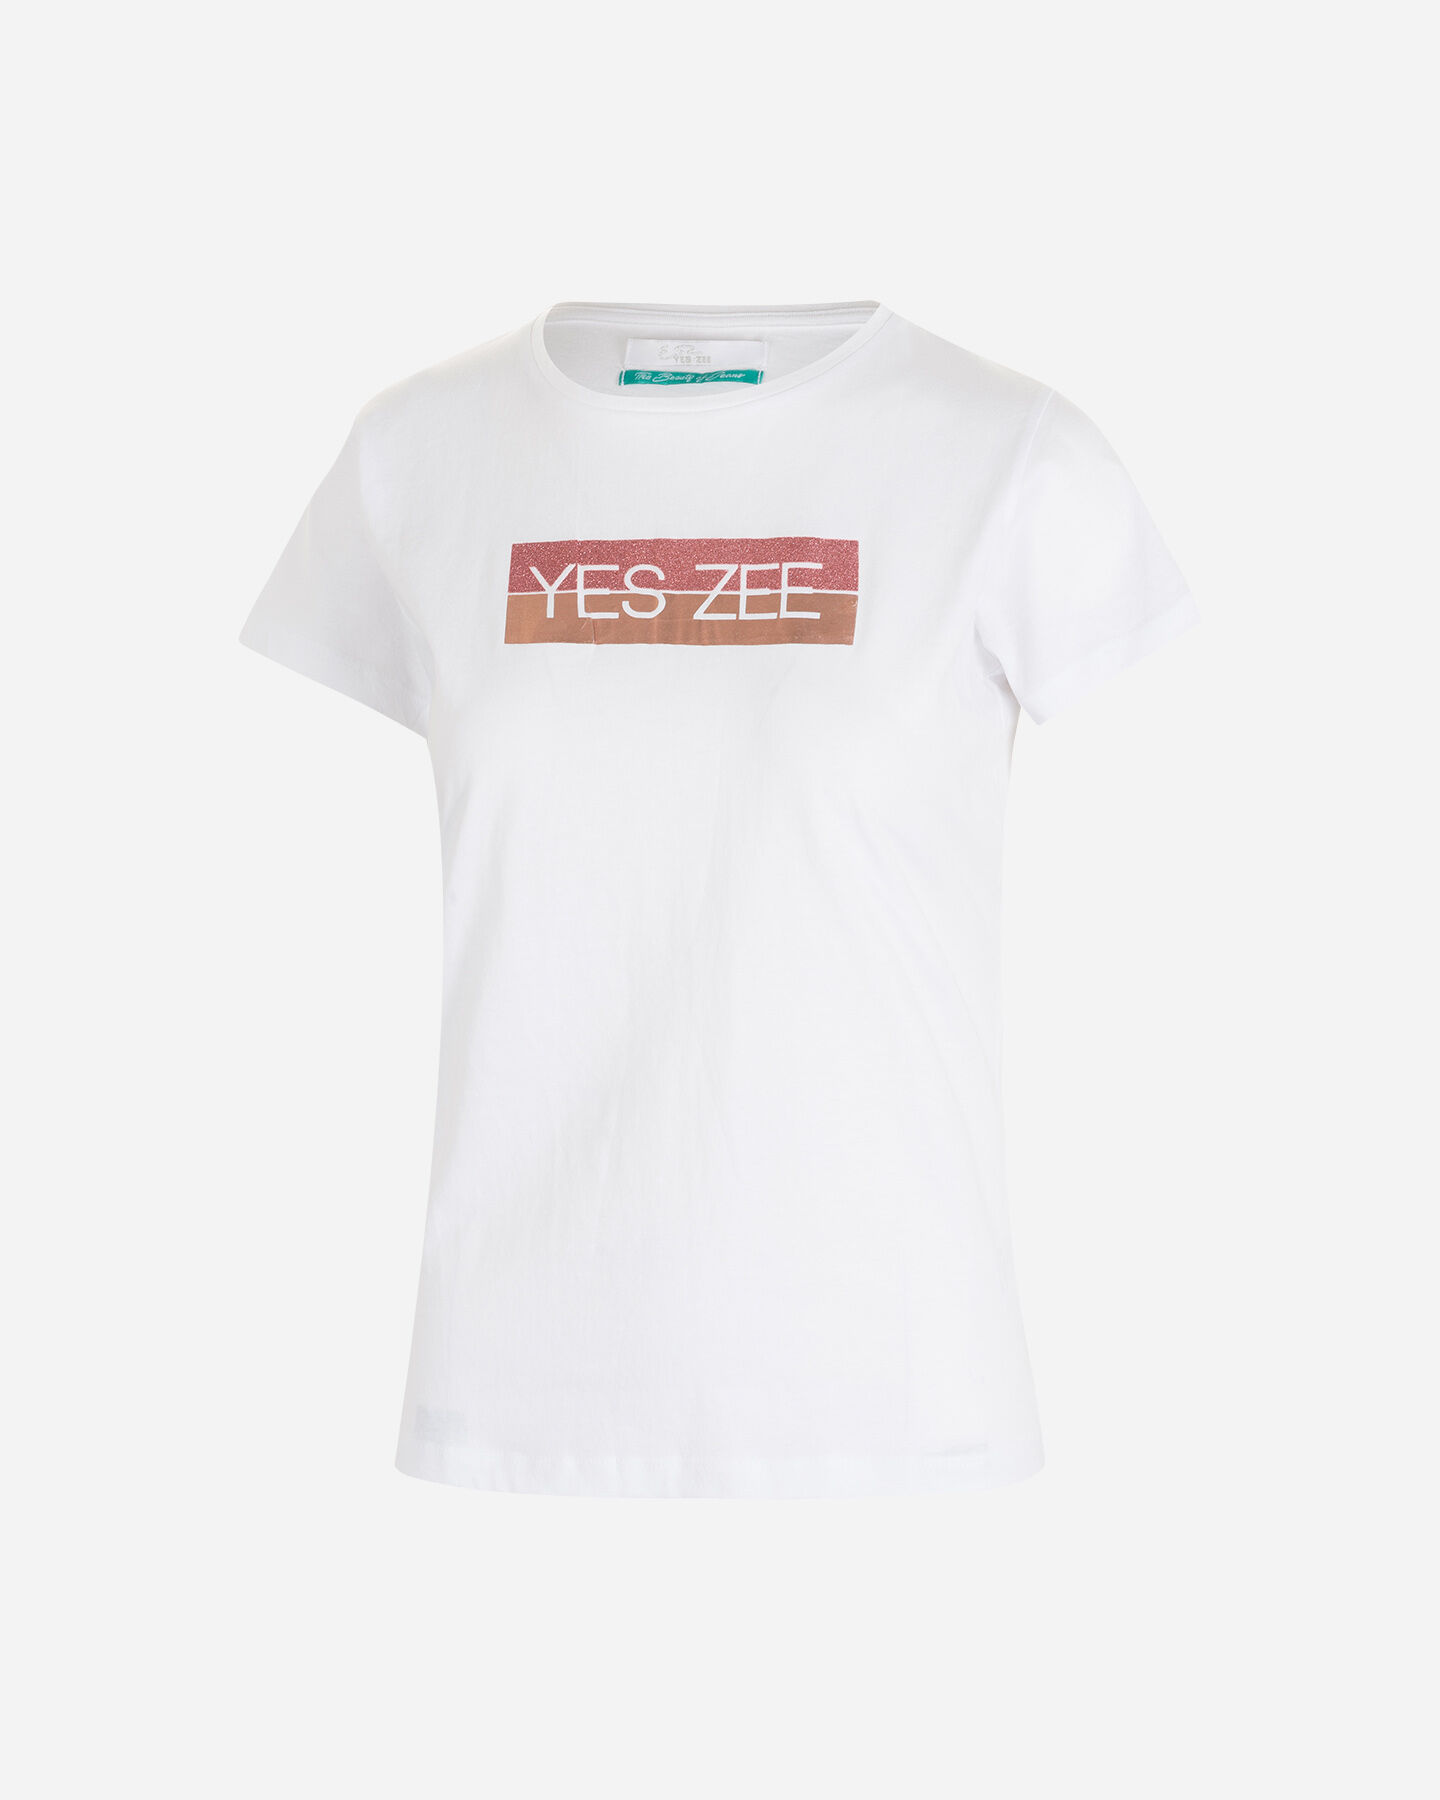  T-Shirt YES ZEE LOGO W S4103803|0101|S scatto 0